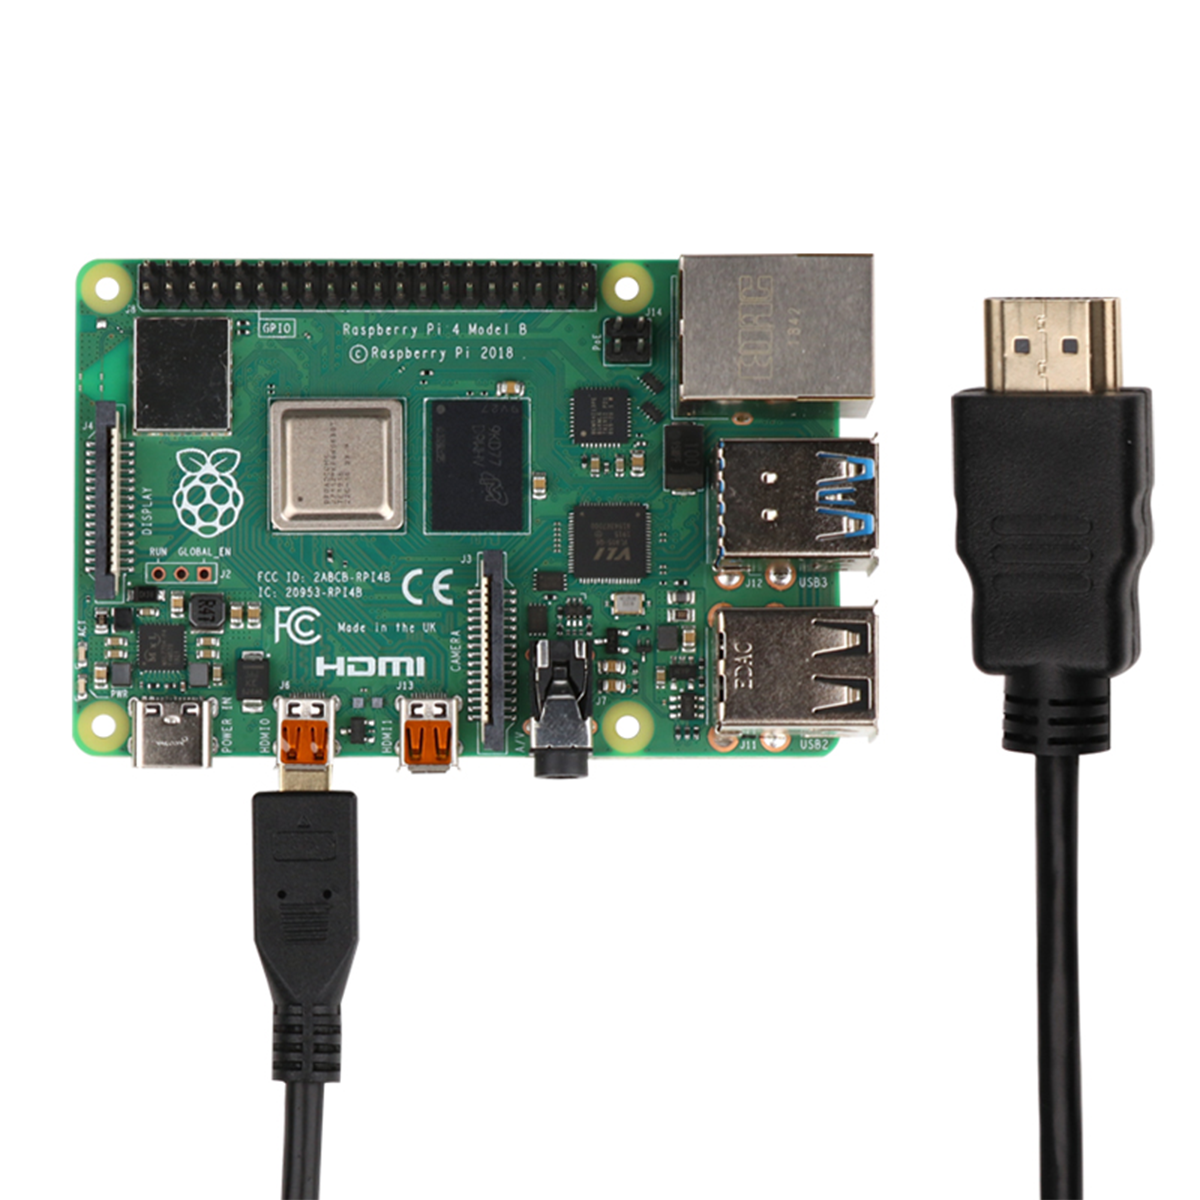 Micro-HDMI to HDMI Adapter Cable for Raspberry Pi 4B 1.5M 4K Data Transfer Display Connector Wire